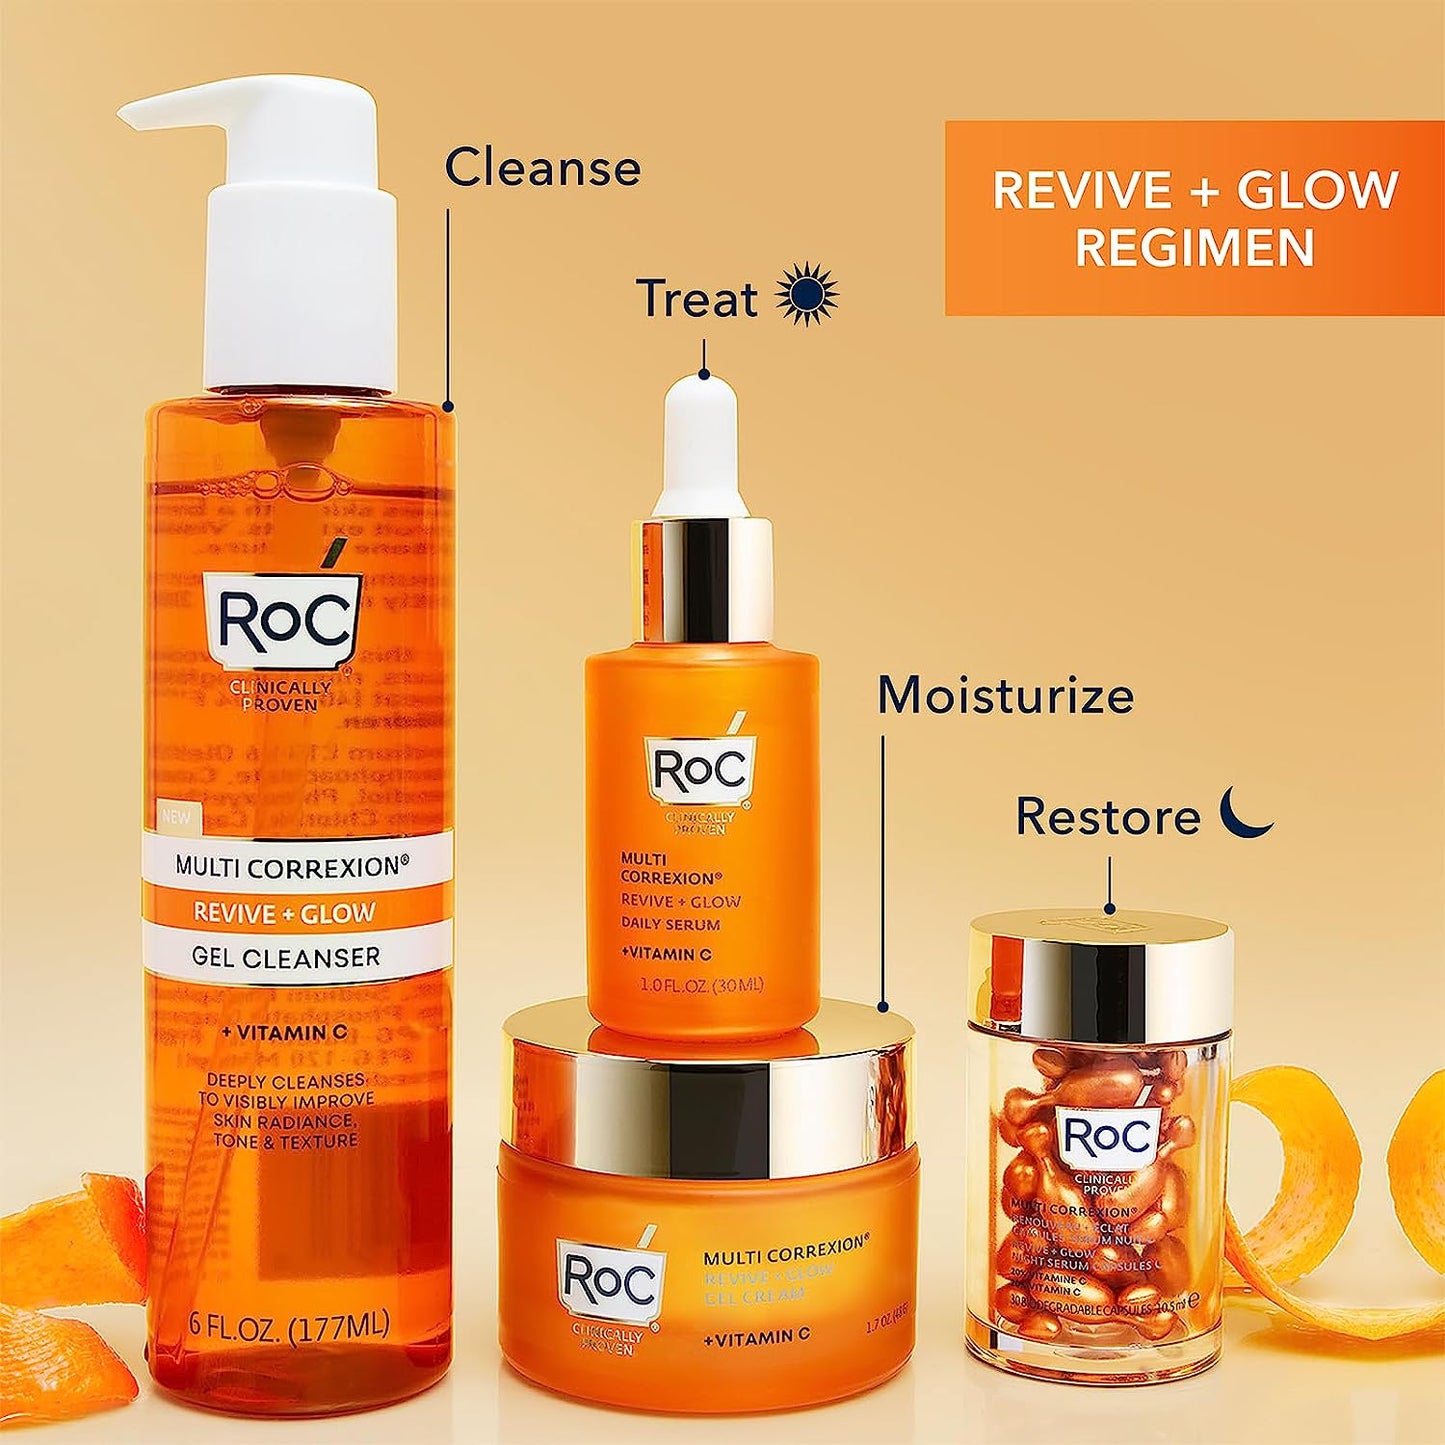 Multi Correxion Revive + Glow Gel Facial Cleanser with Vitamin C, & Glycolic Acid, Paraben-Free, Sulfate-Free Skin Care, 6 Ounces